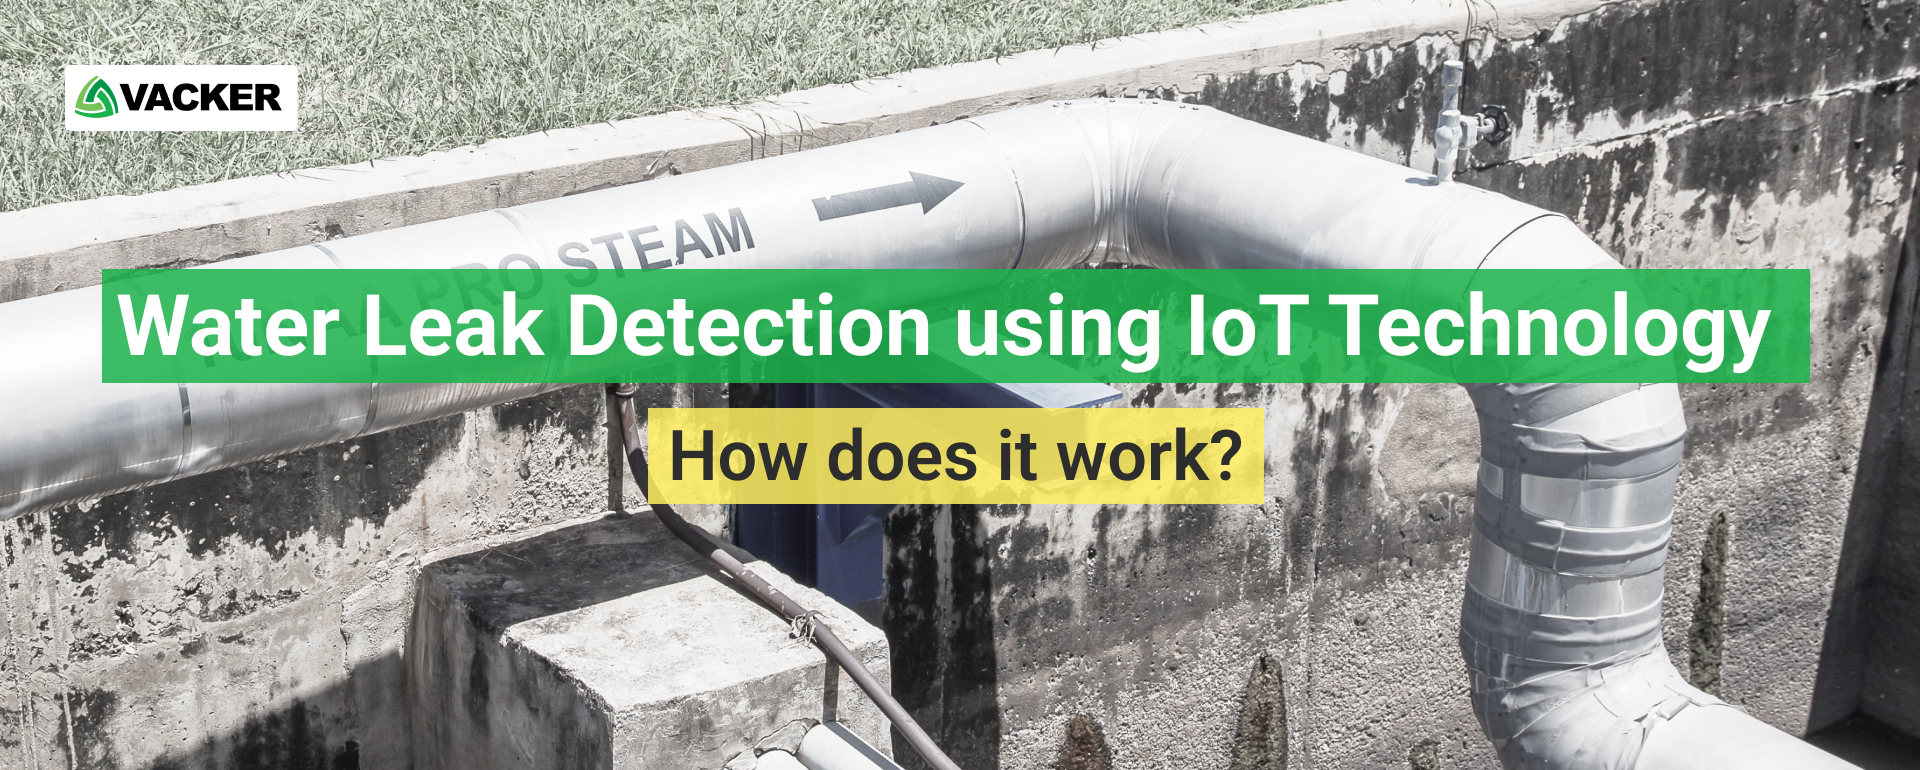 Water Leak Detection Using IoT Technology: How Does It Work?